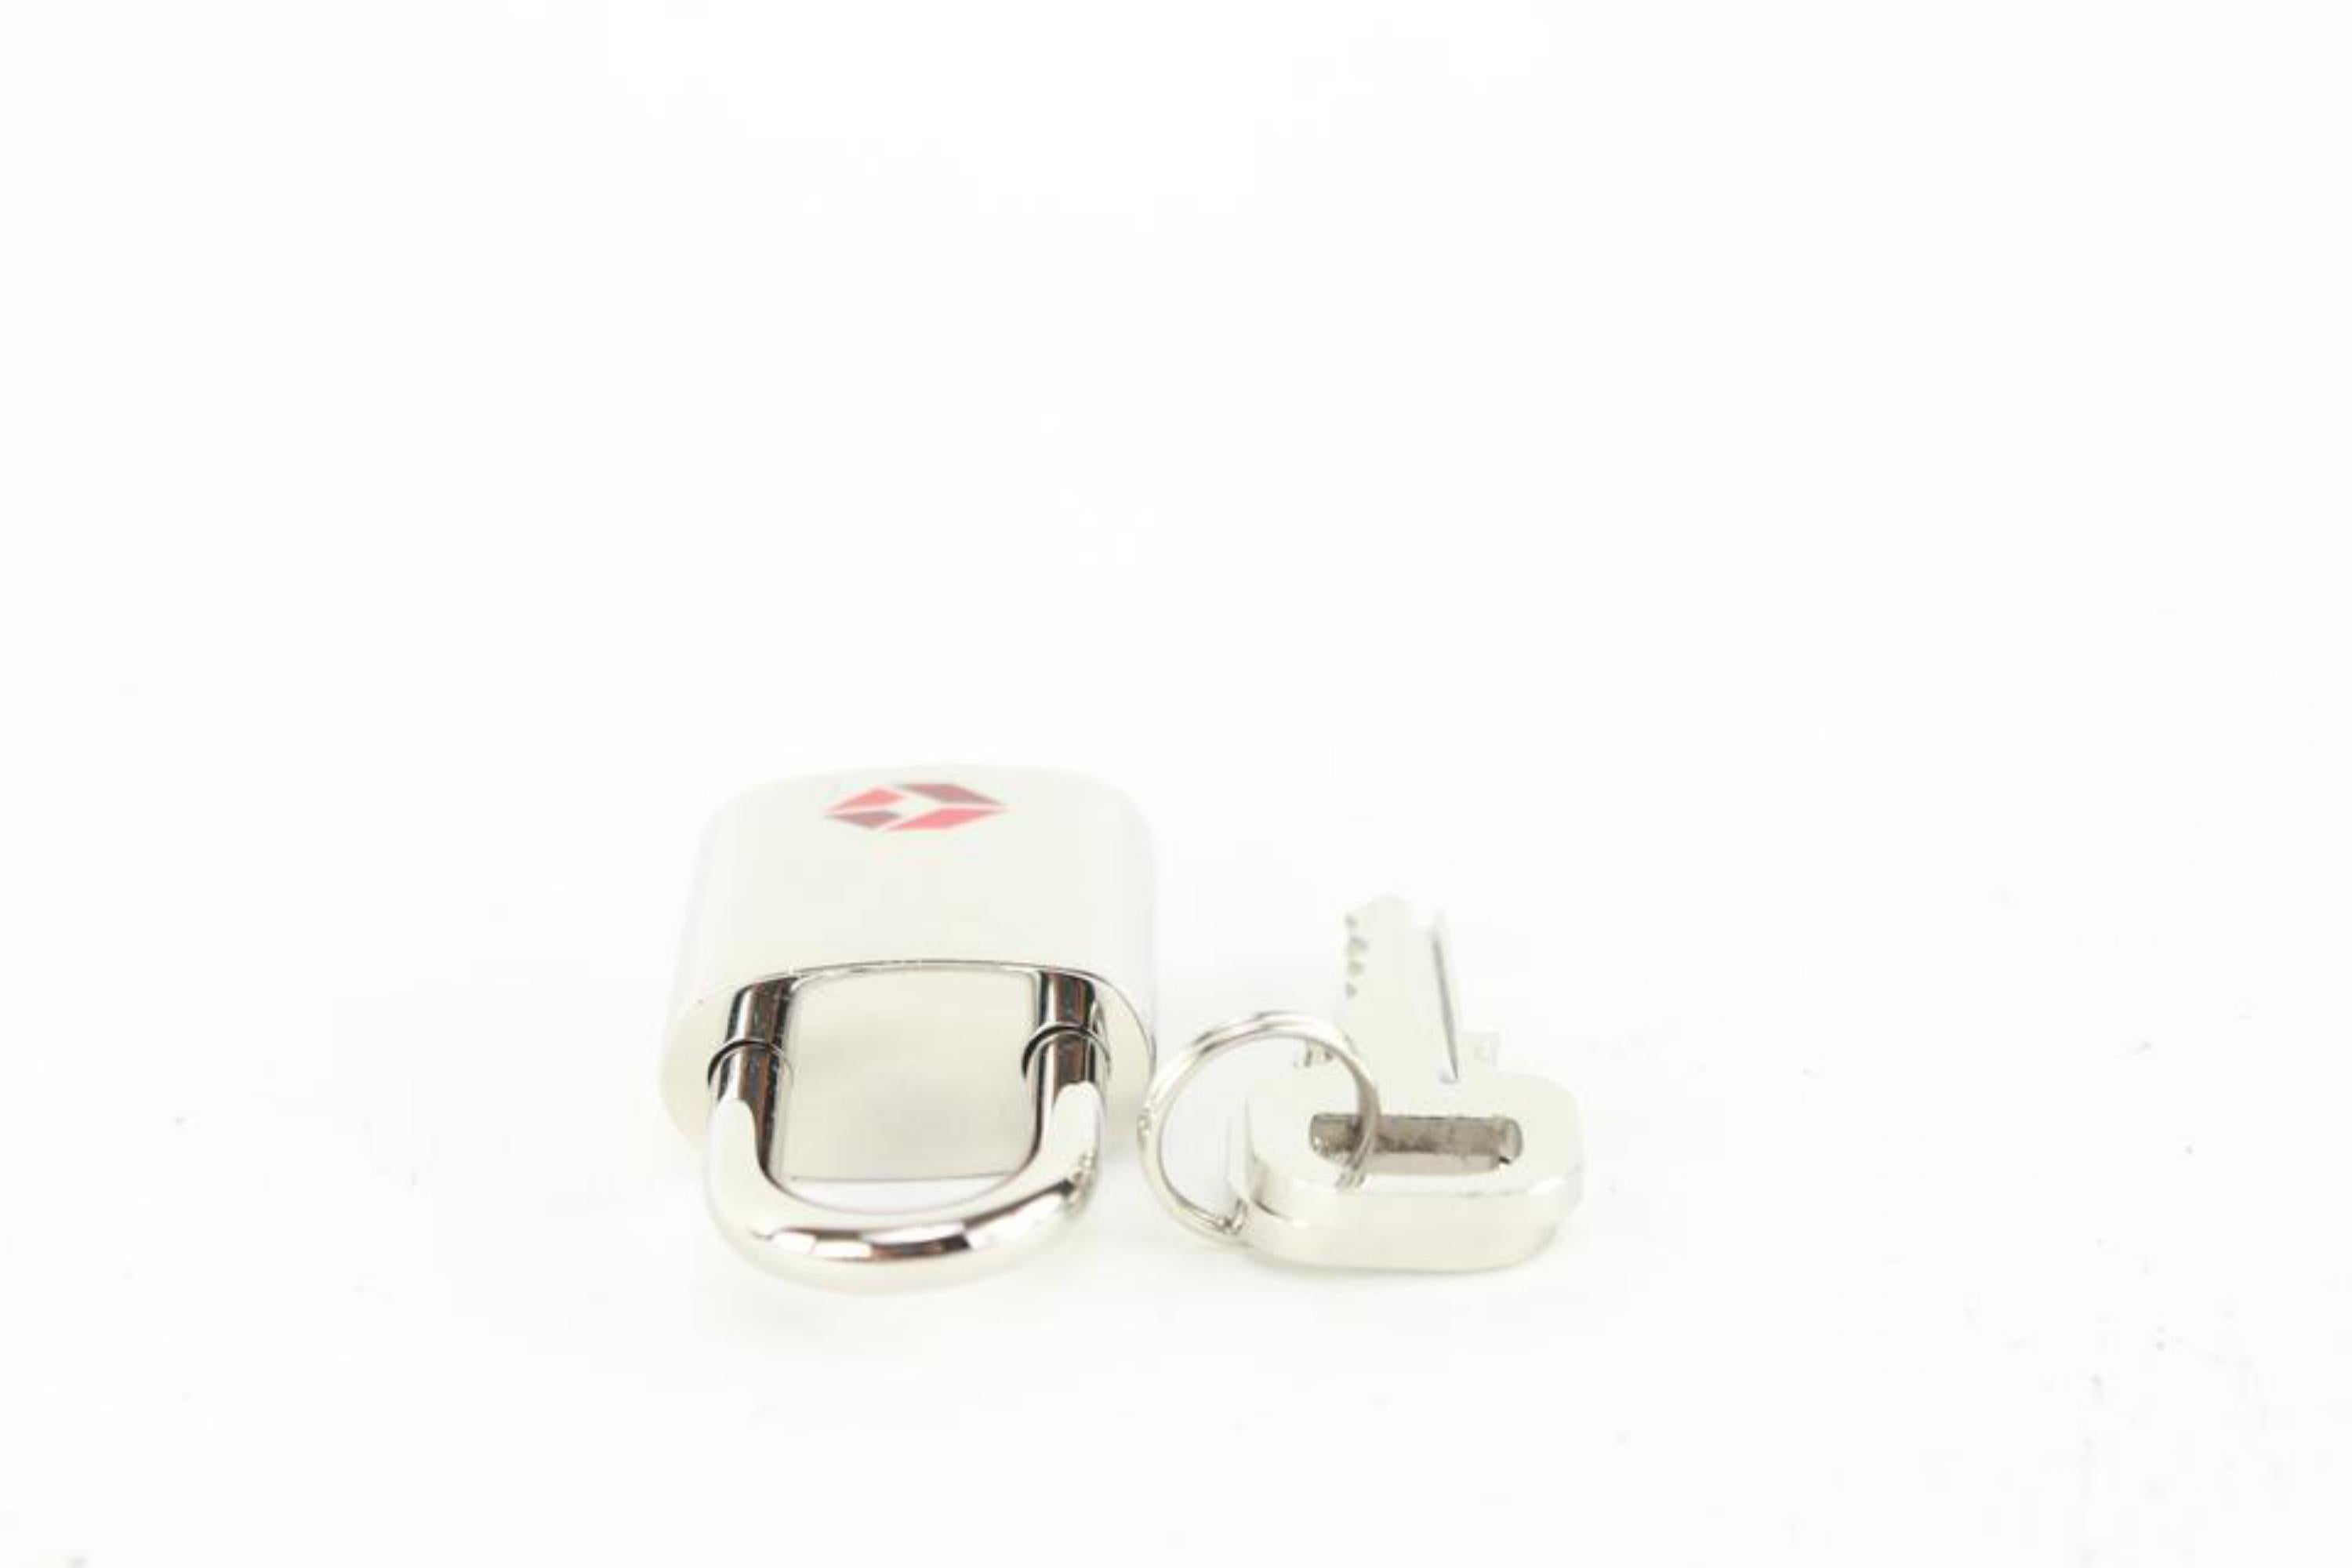 Louis Vuitton TSA De Voyage Padlock Silver and 2 Key Set Lock 57lk63s In Excellent Condition For Sale In Dix hills, NY